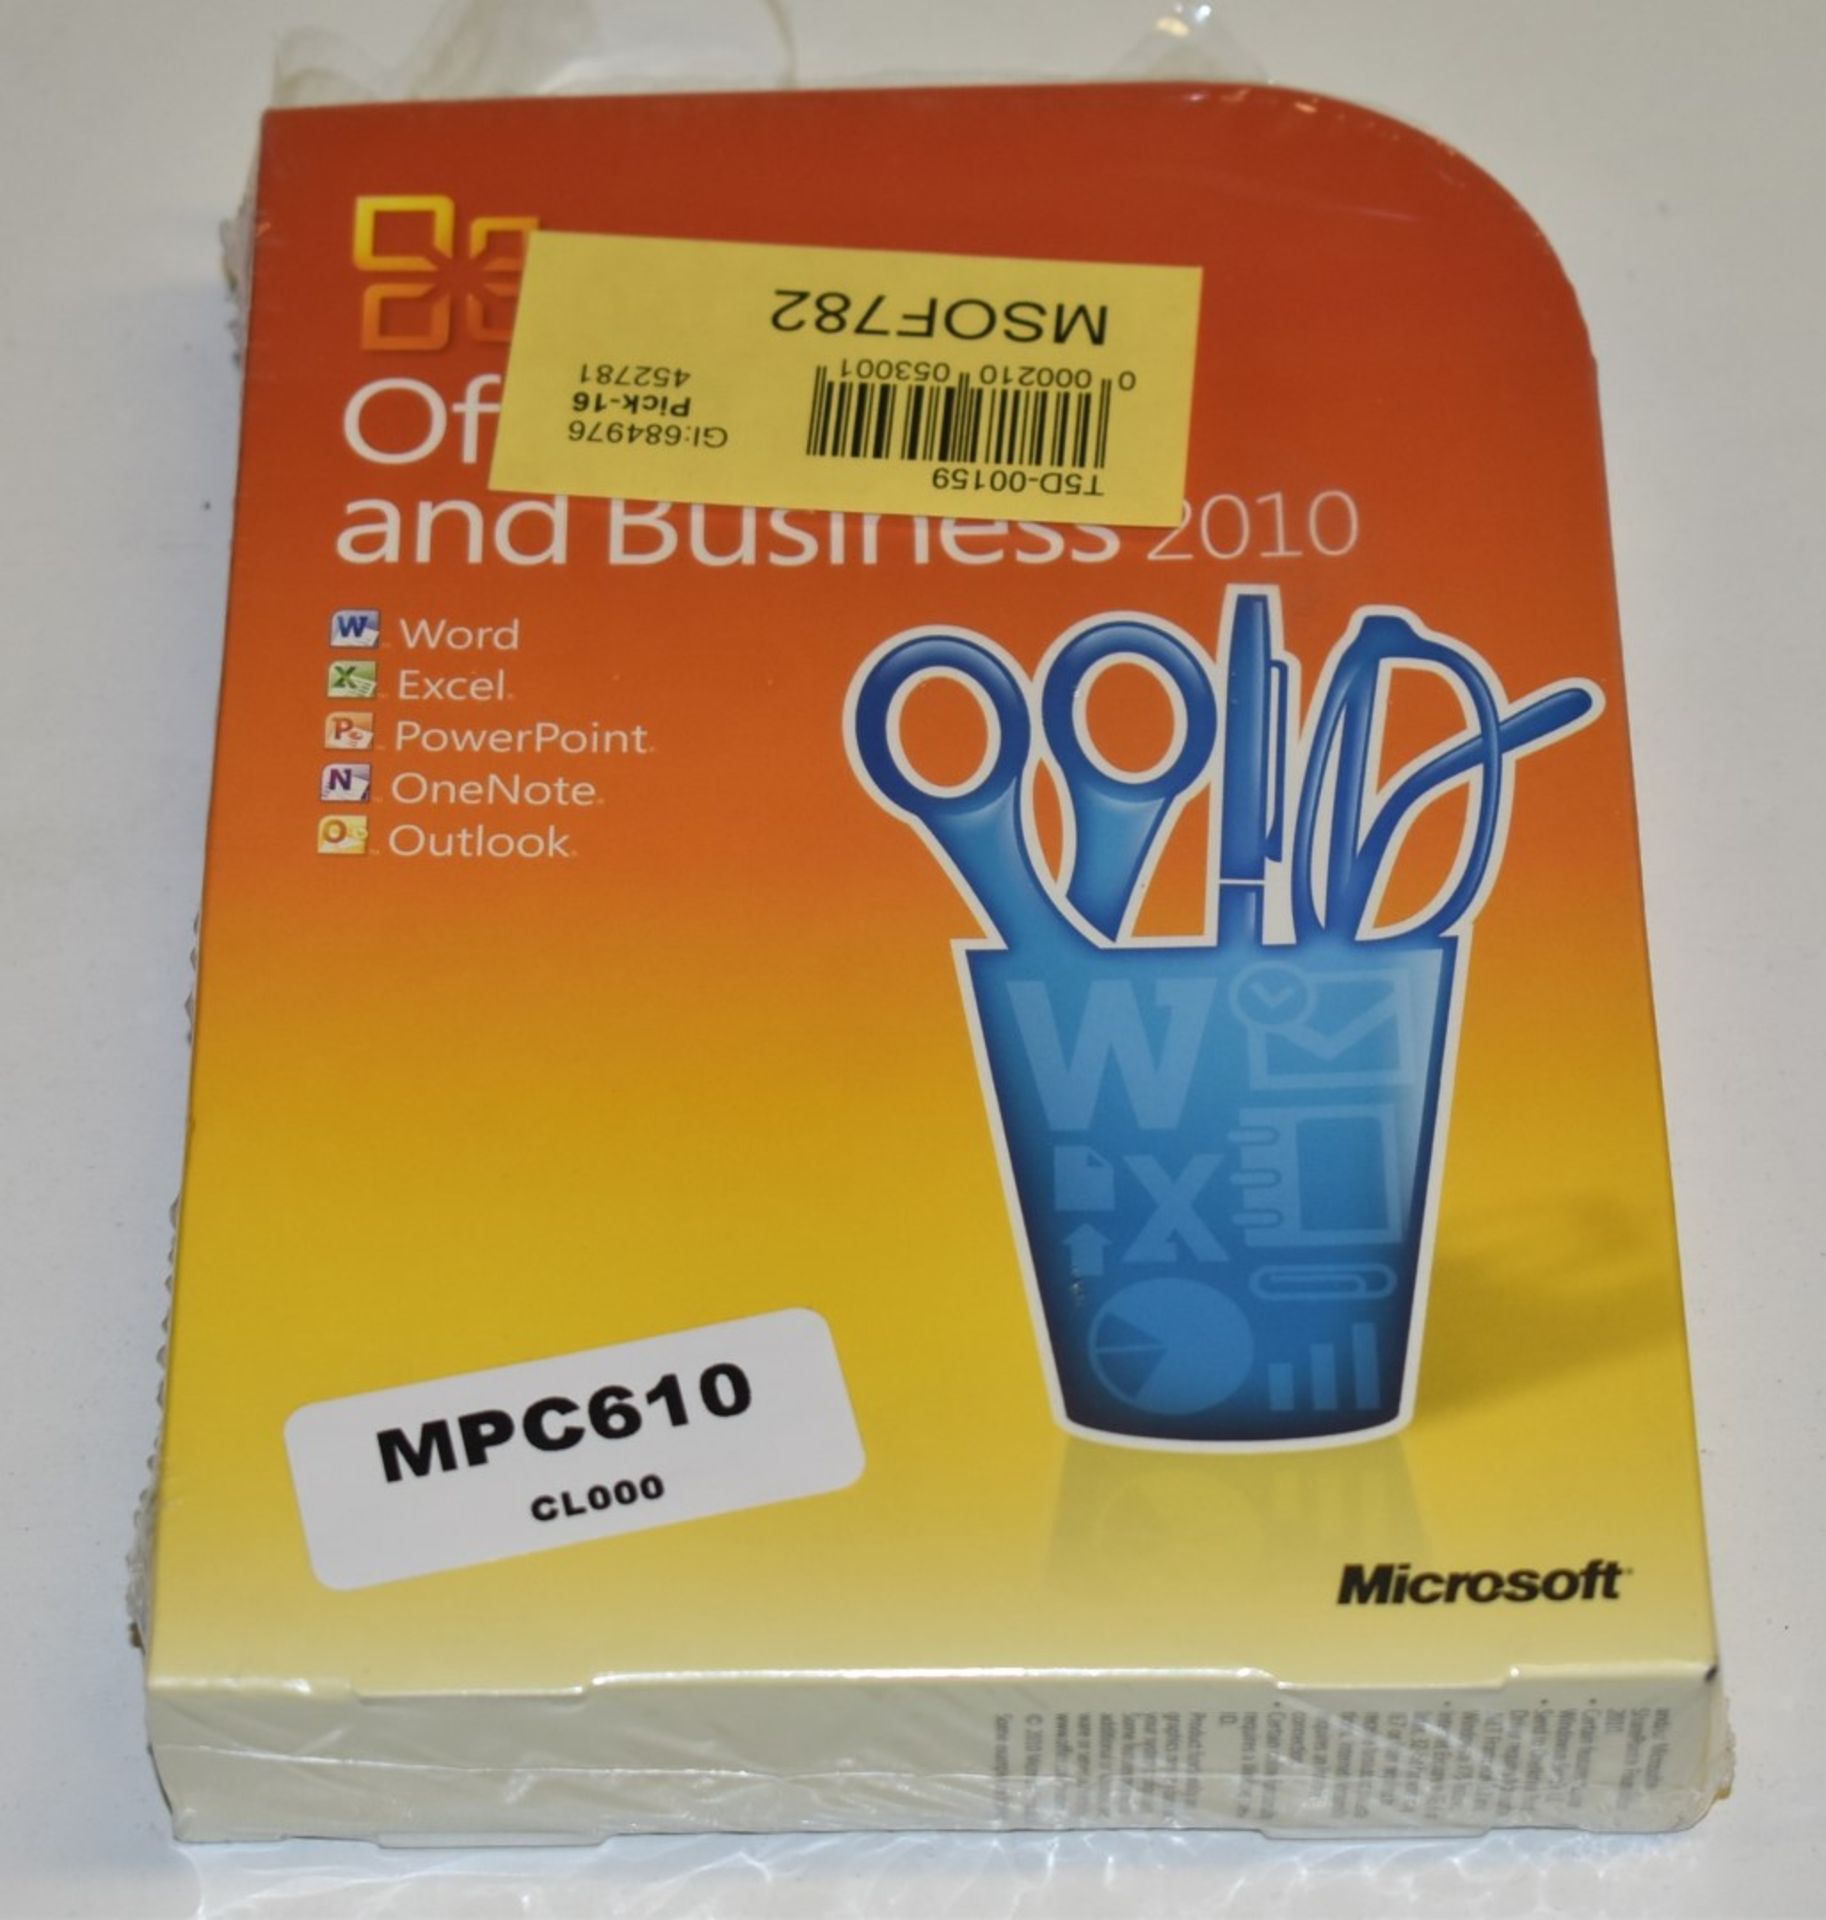 1 x Microsoft Office 2010 Home and Business - Activation Key Card With Original Box - Ref: MPC610 CG